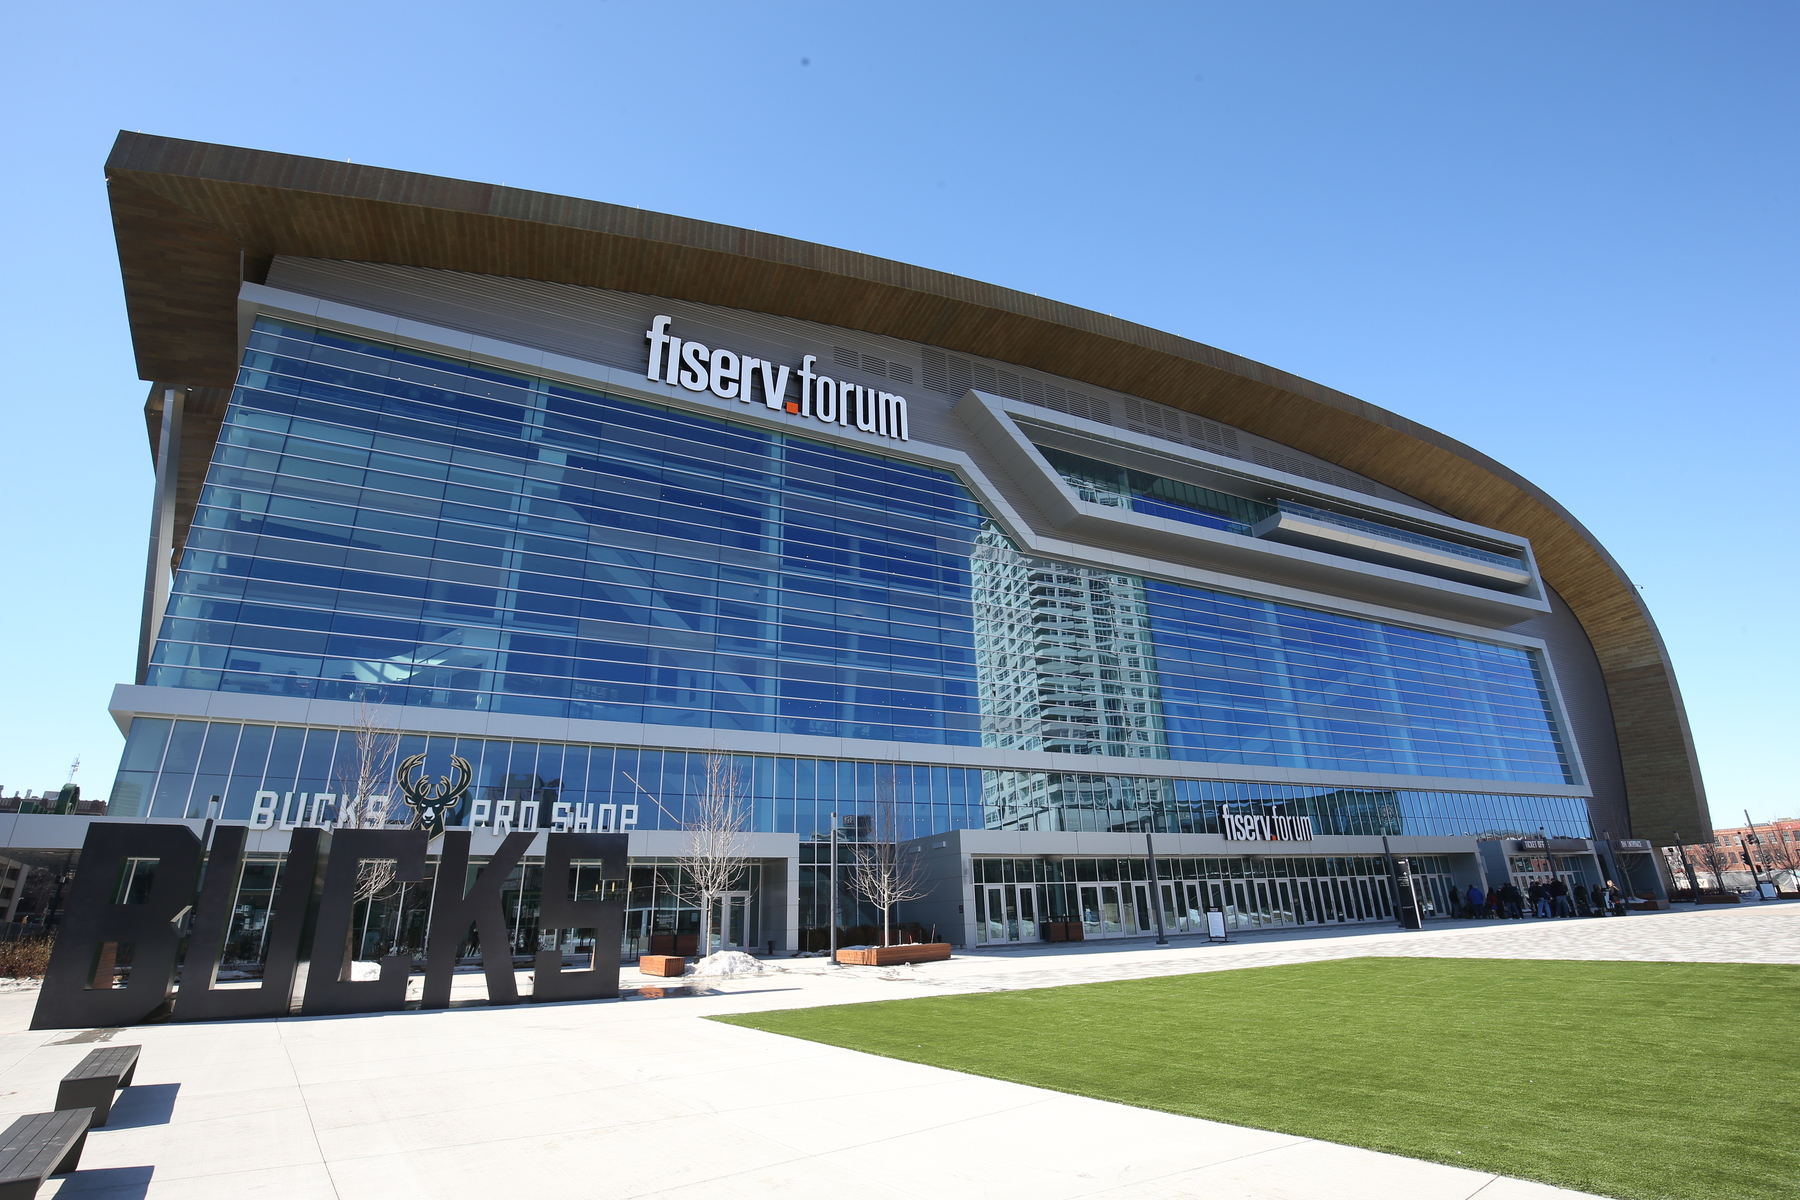 Main entrance of the Fiserv Forum